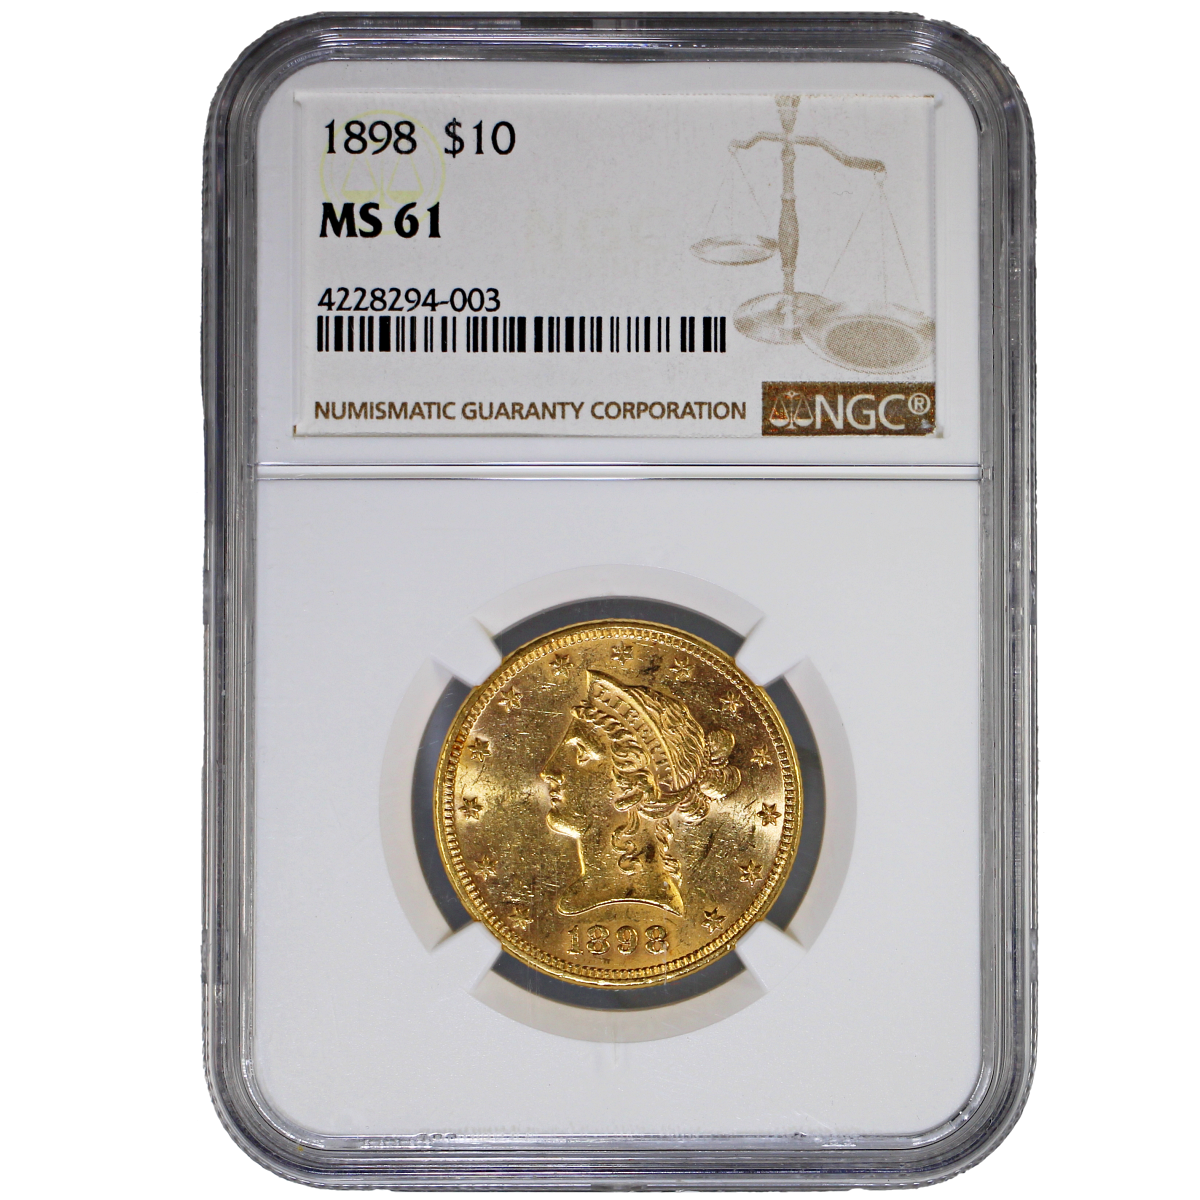 $10 Gold Liberty Eagle Mint State MS61 PCGS or NGC (Random Year)